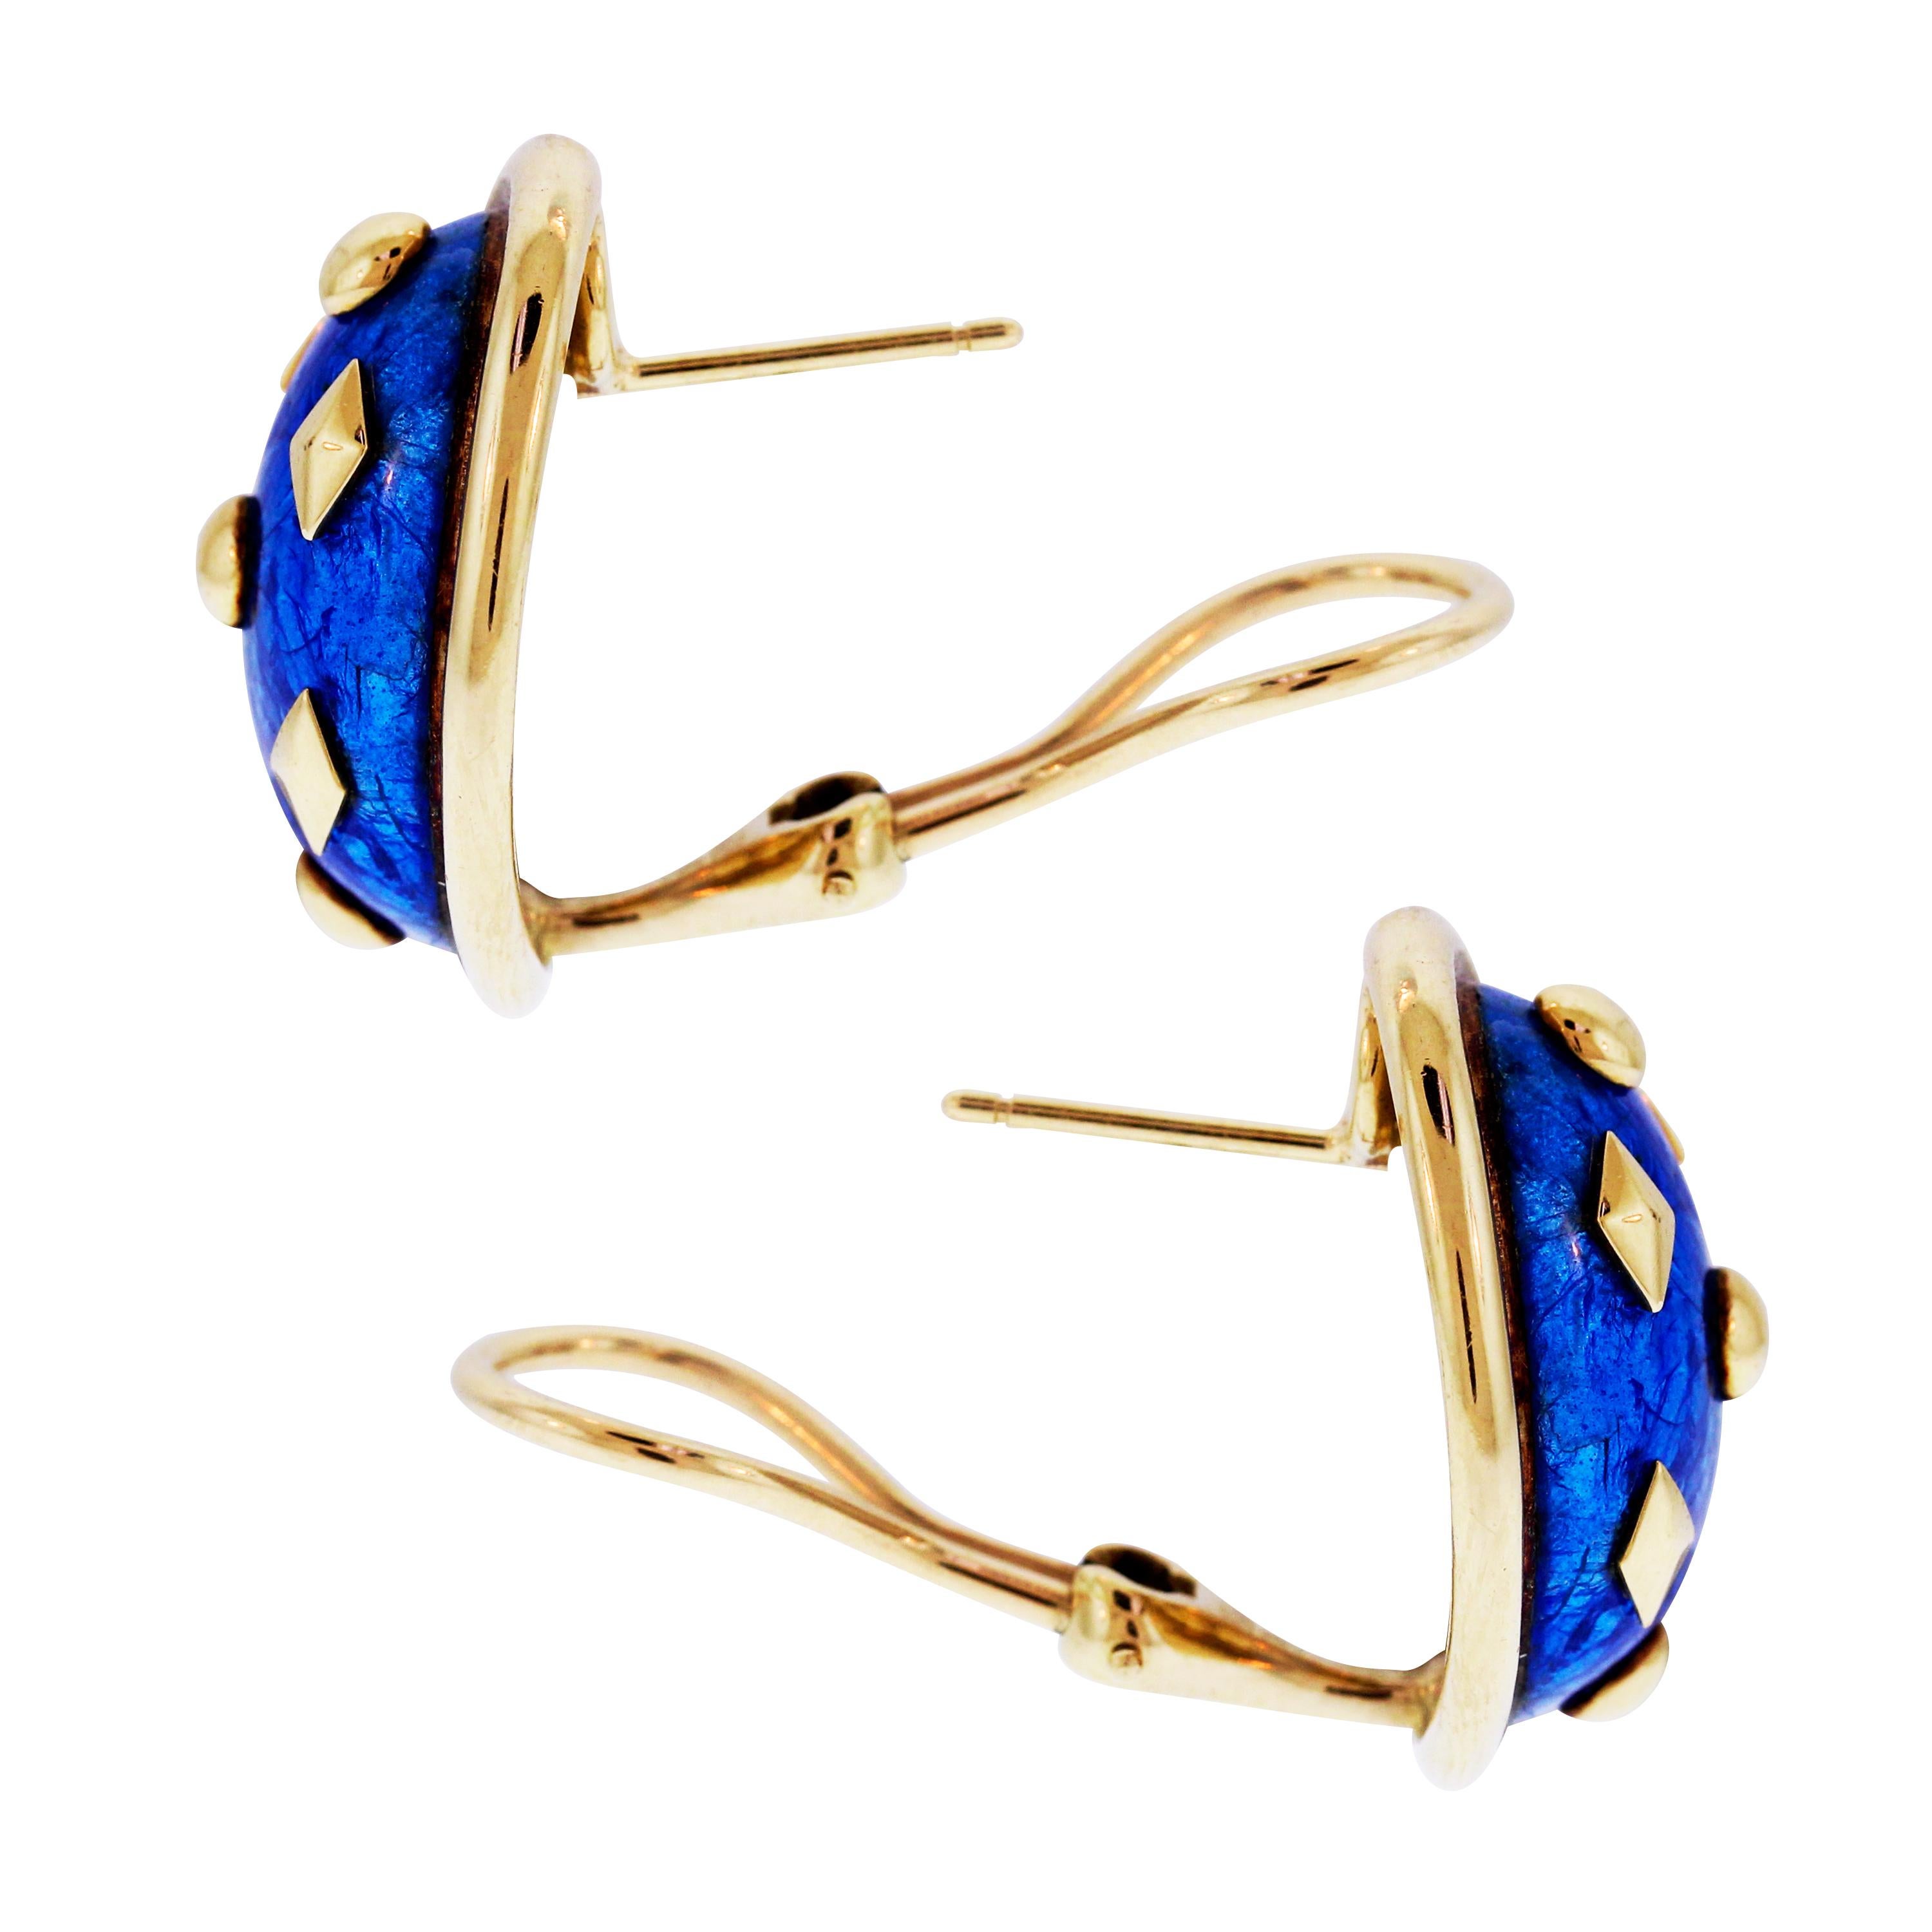 IF YOU ARE REALLY INTERESTED, CONTACT US WITH ANY REASONABLE OFFER. WE WILL TRY OUR BEST TO MAKE YOU HAPPY!

Tiffany & Co. Schlumberger 18K Yellow Gold earrings with Blue Enamel 

Created by Jean Schlumberger for Tiffany & Co

Beautifully done in